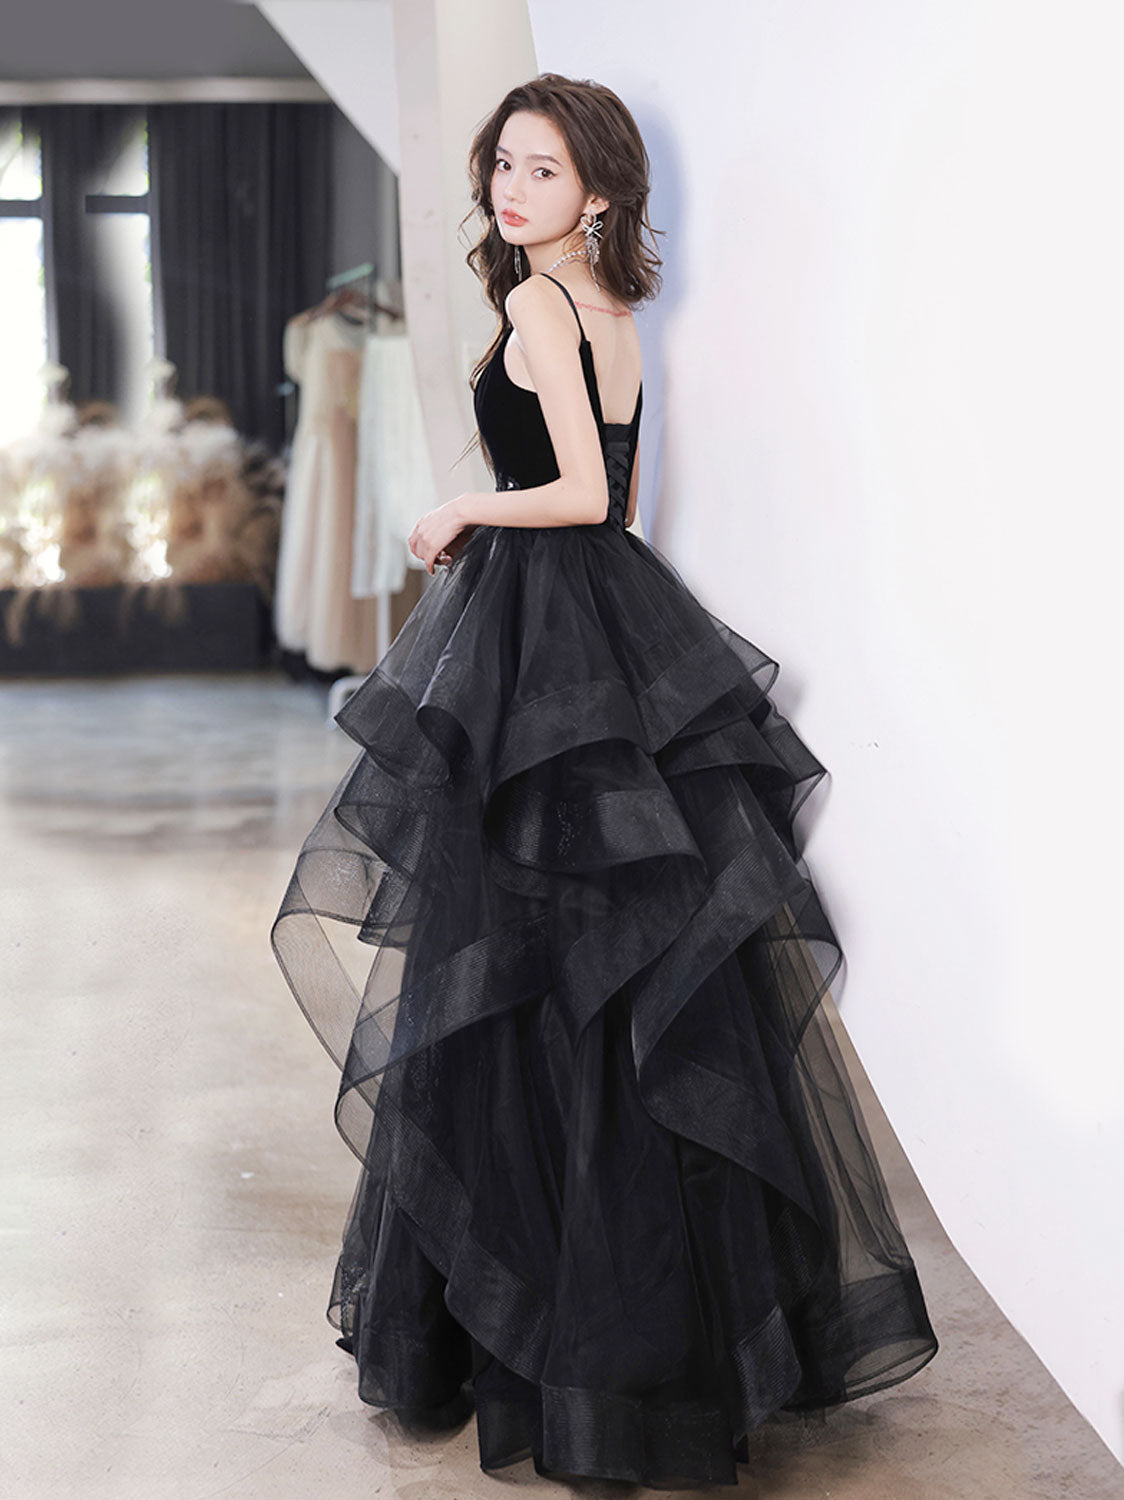 Women's glam black bodice floor length evening gown with silver tulle skirt